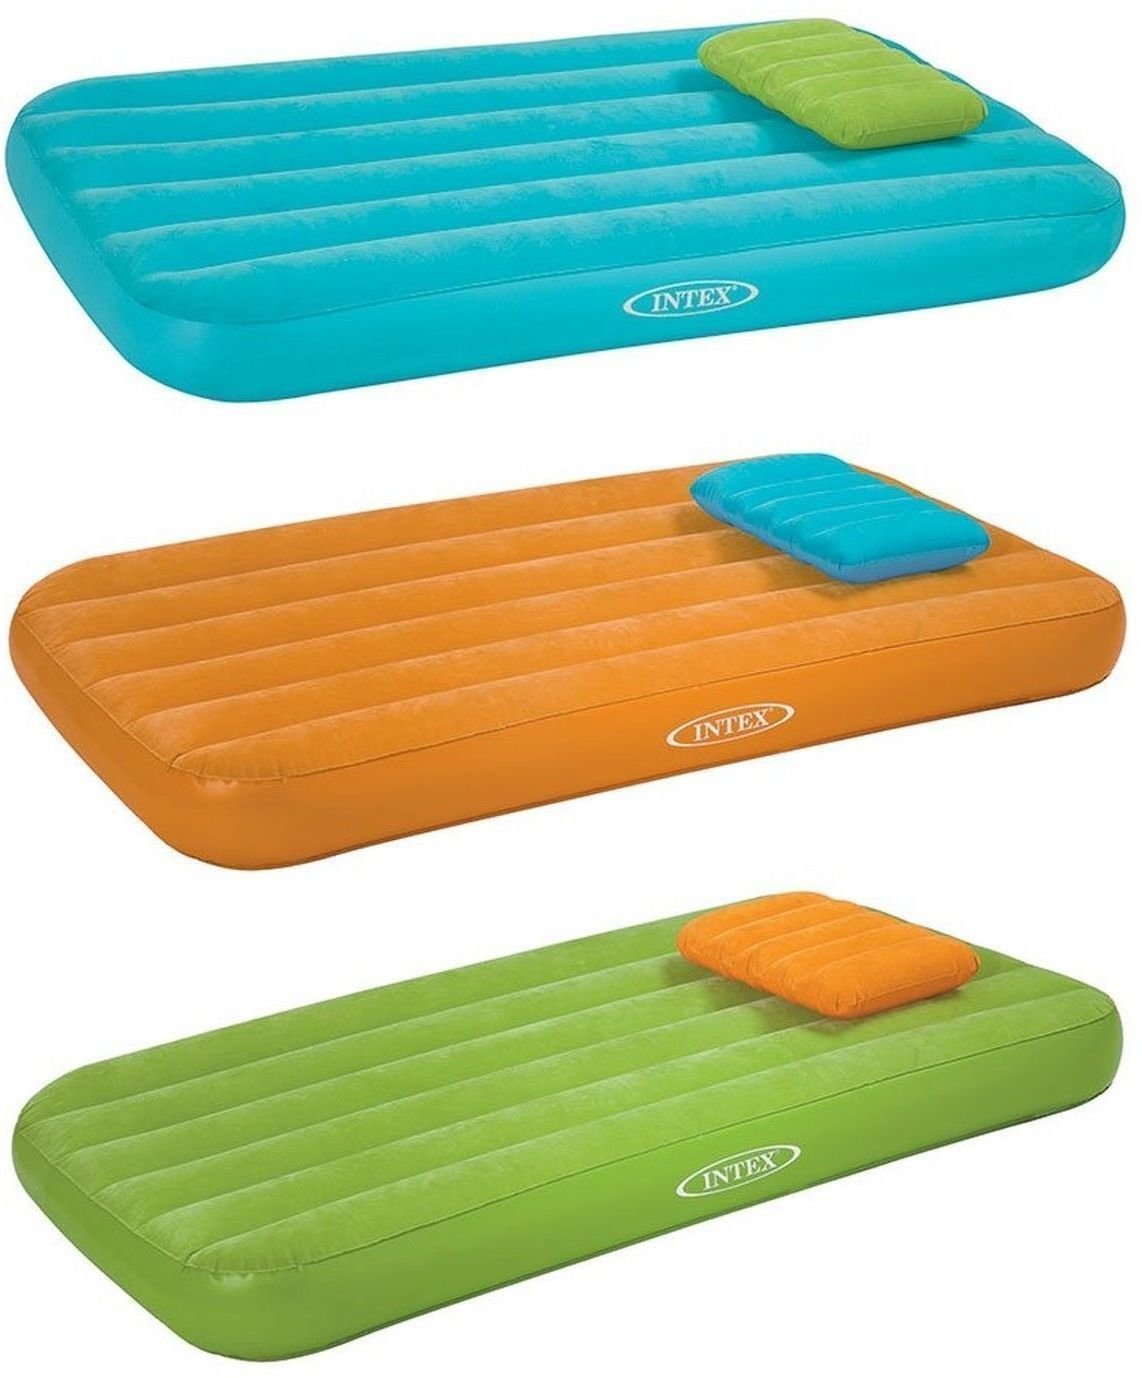 Mobilier gonflable Intex Cozy Kidz Airbeds